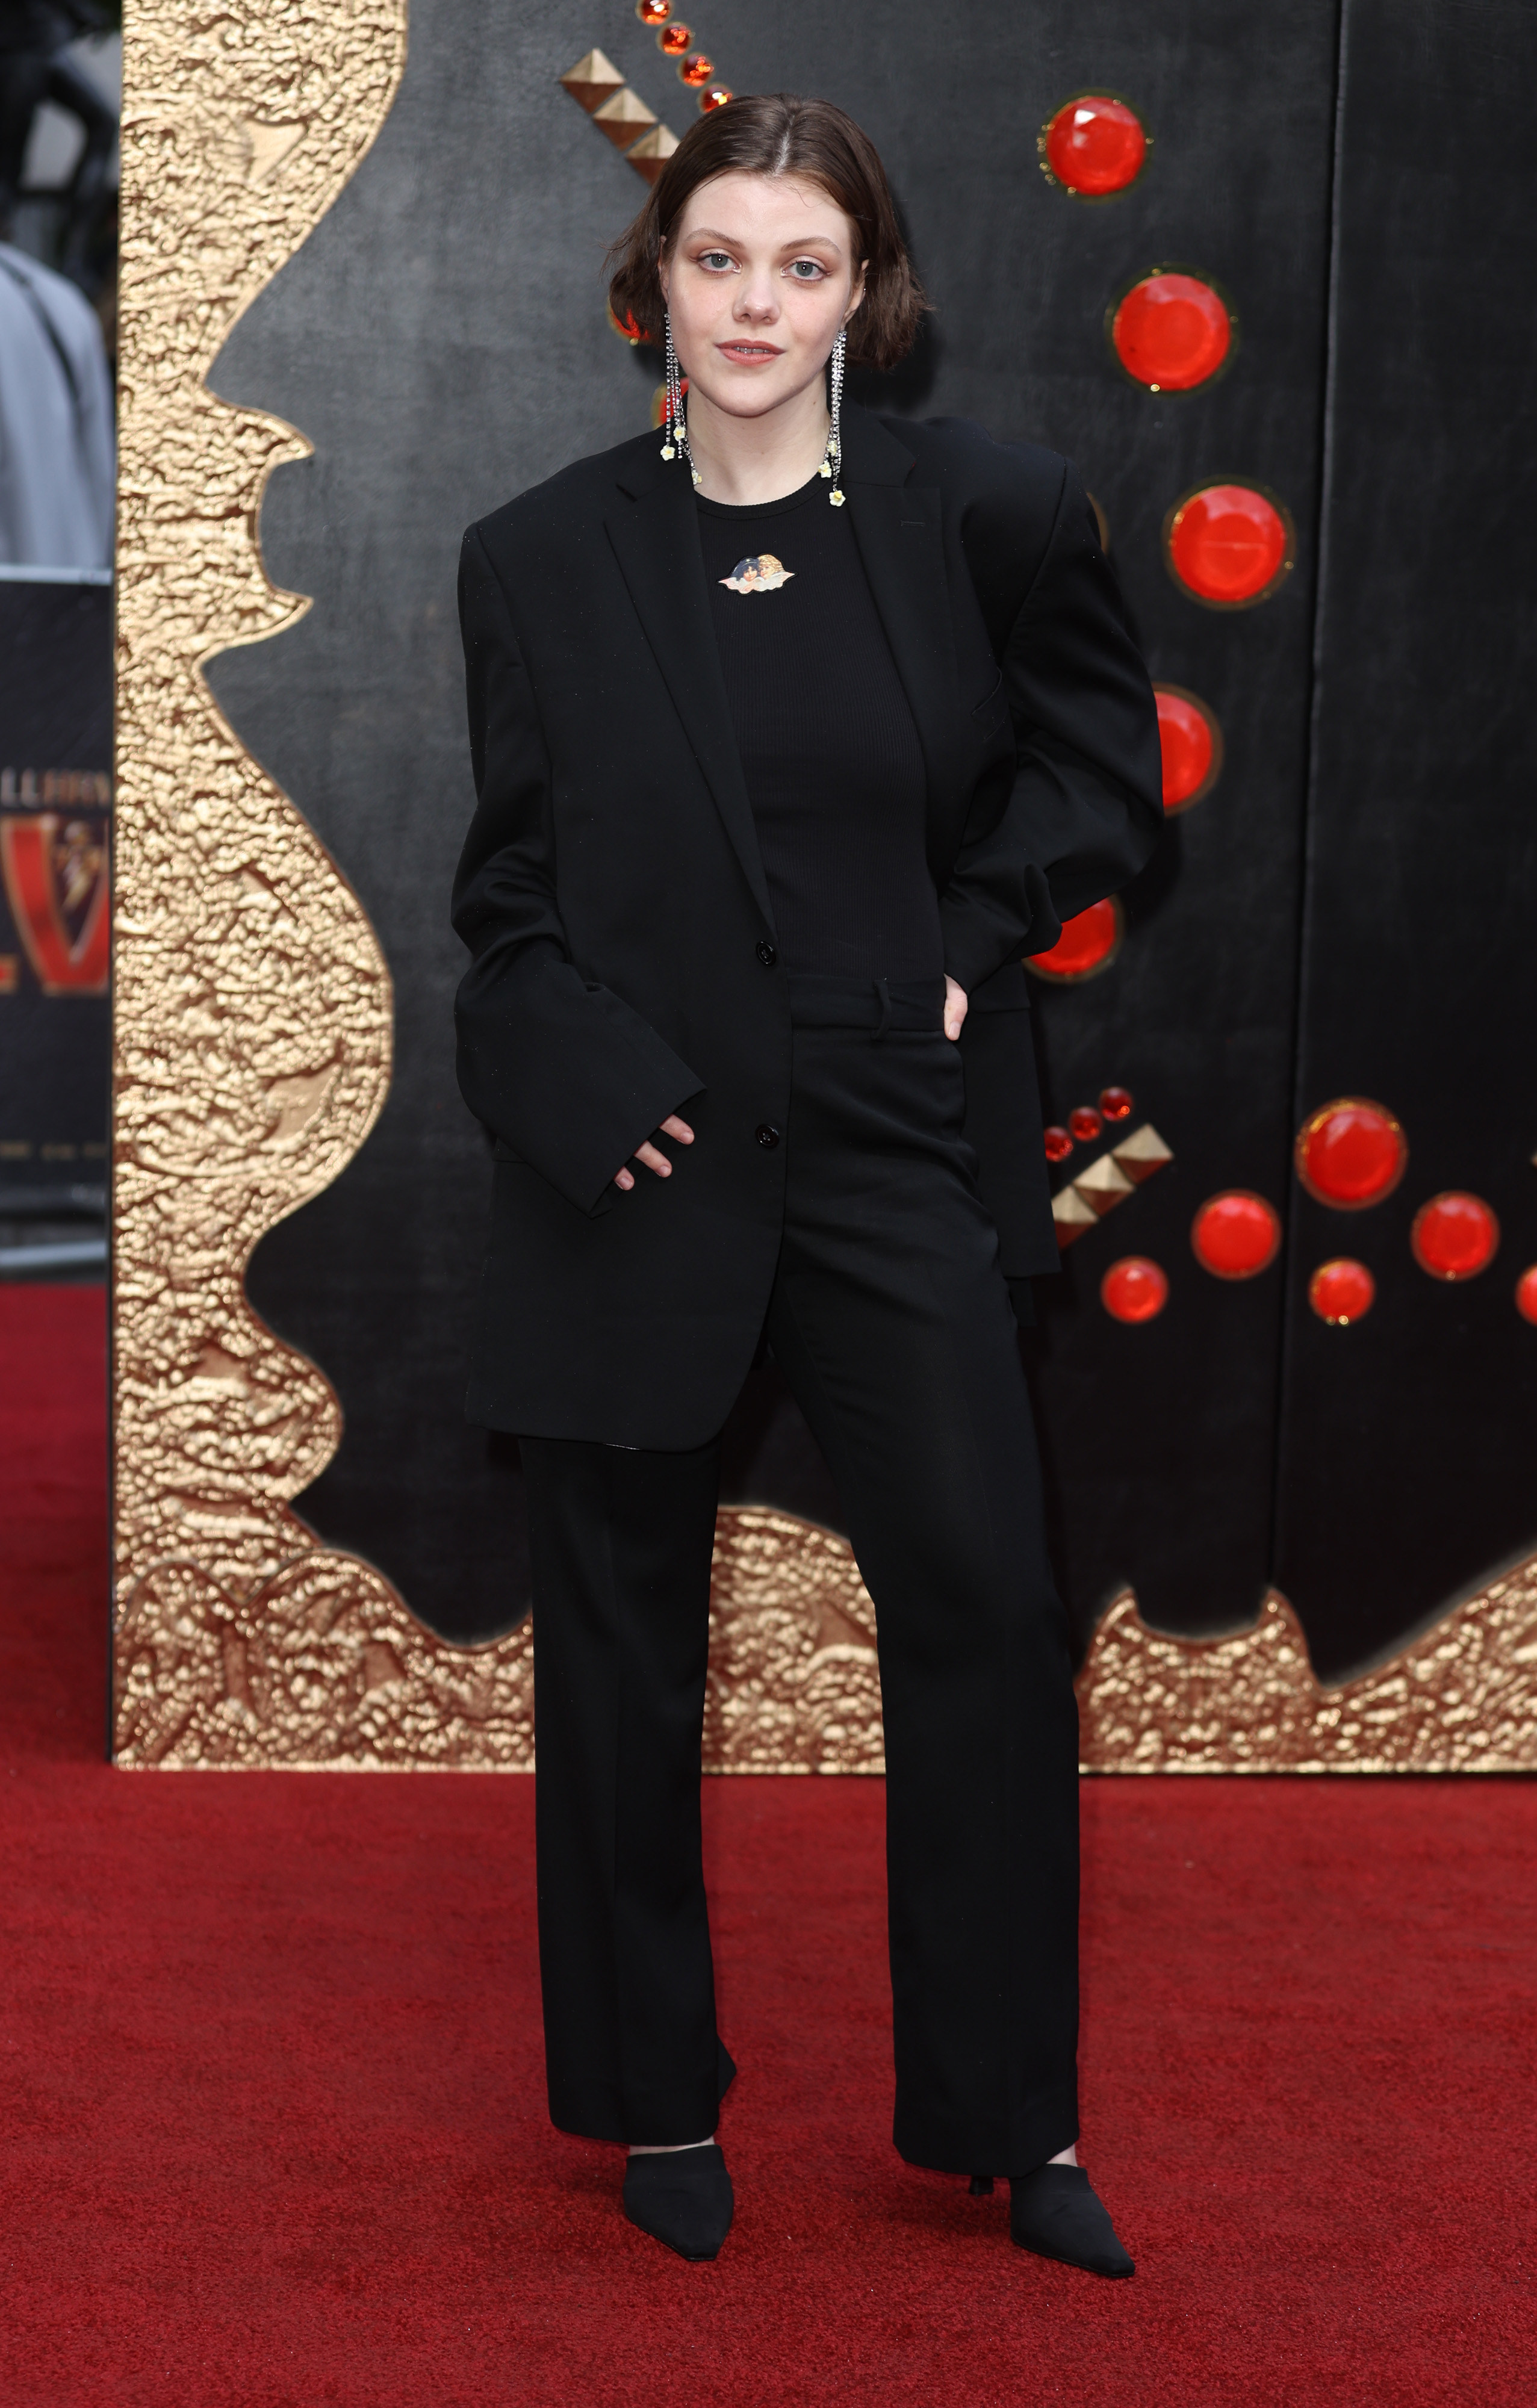 Georgie on the red carpet in black pants, top, and jacket and long earrings